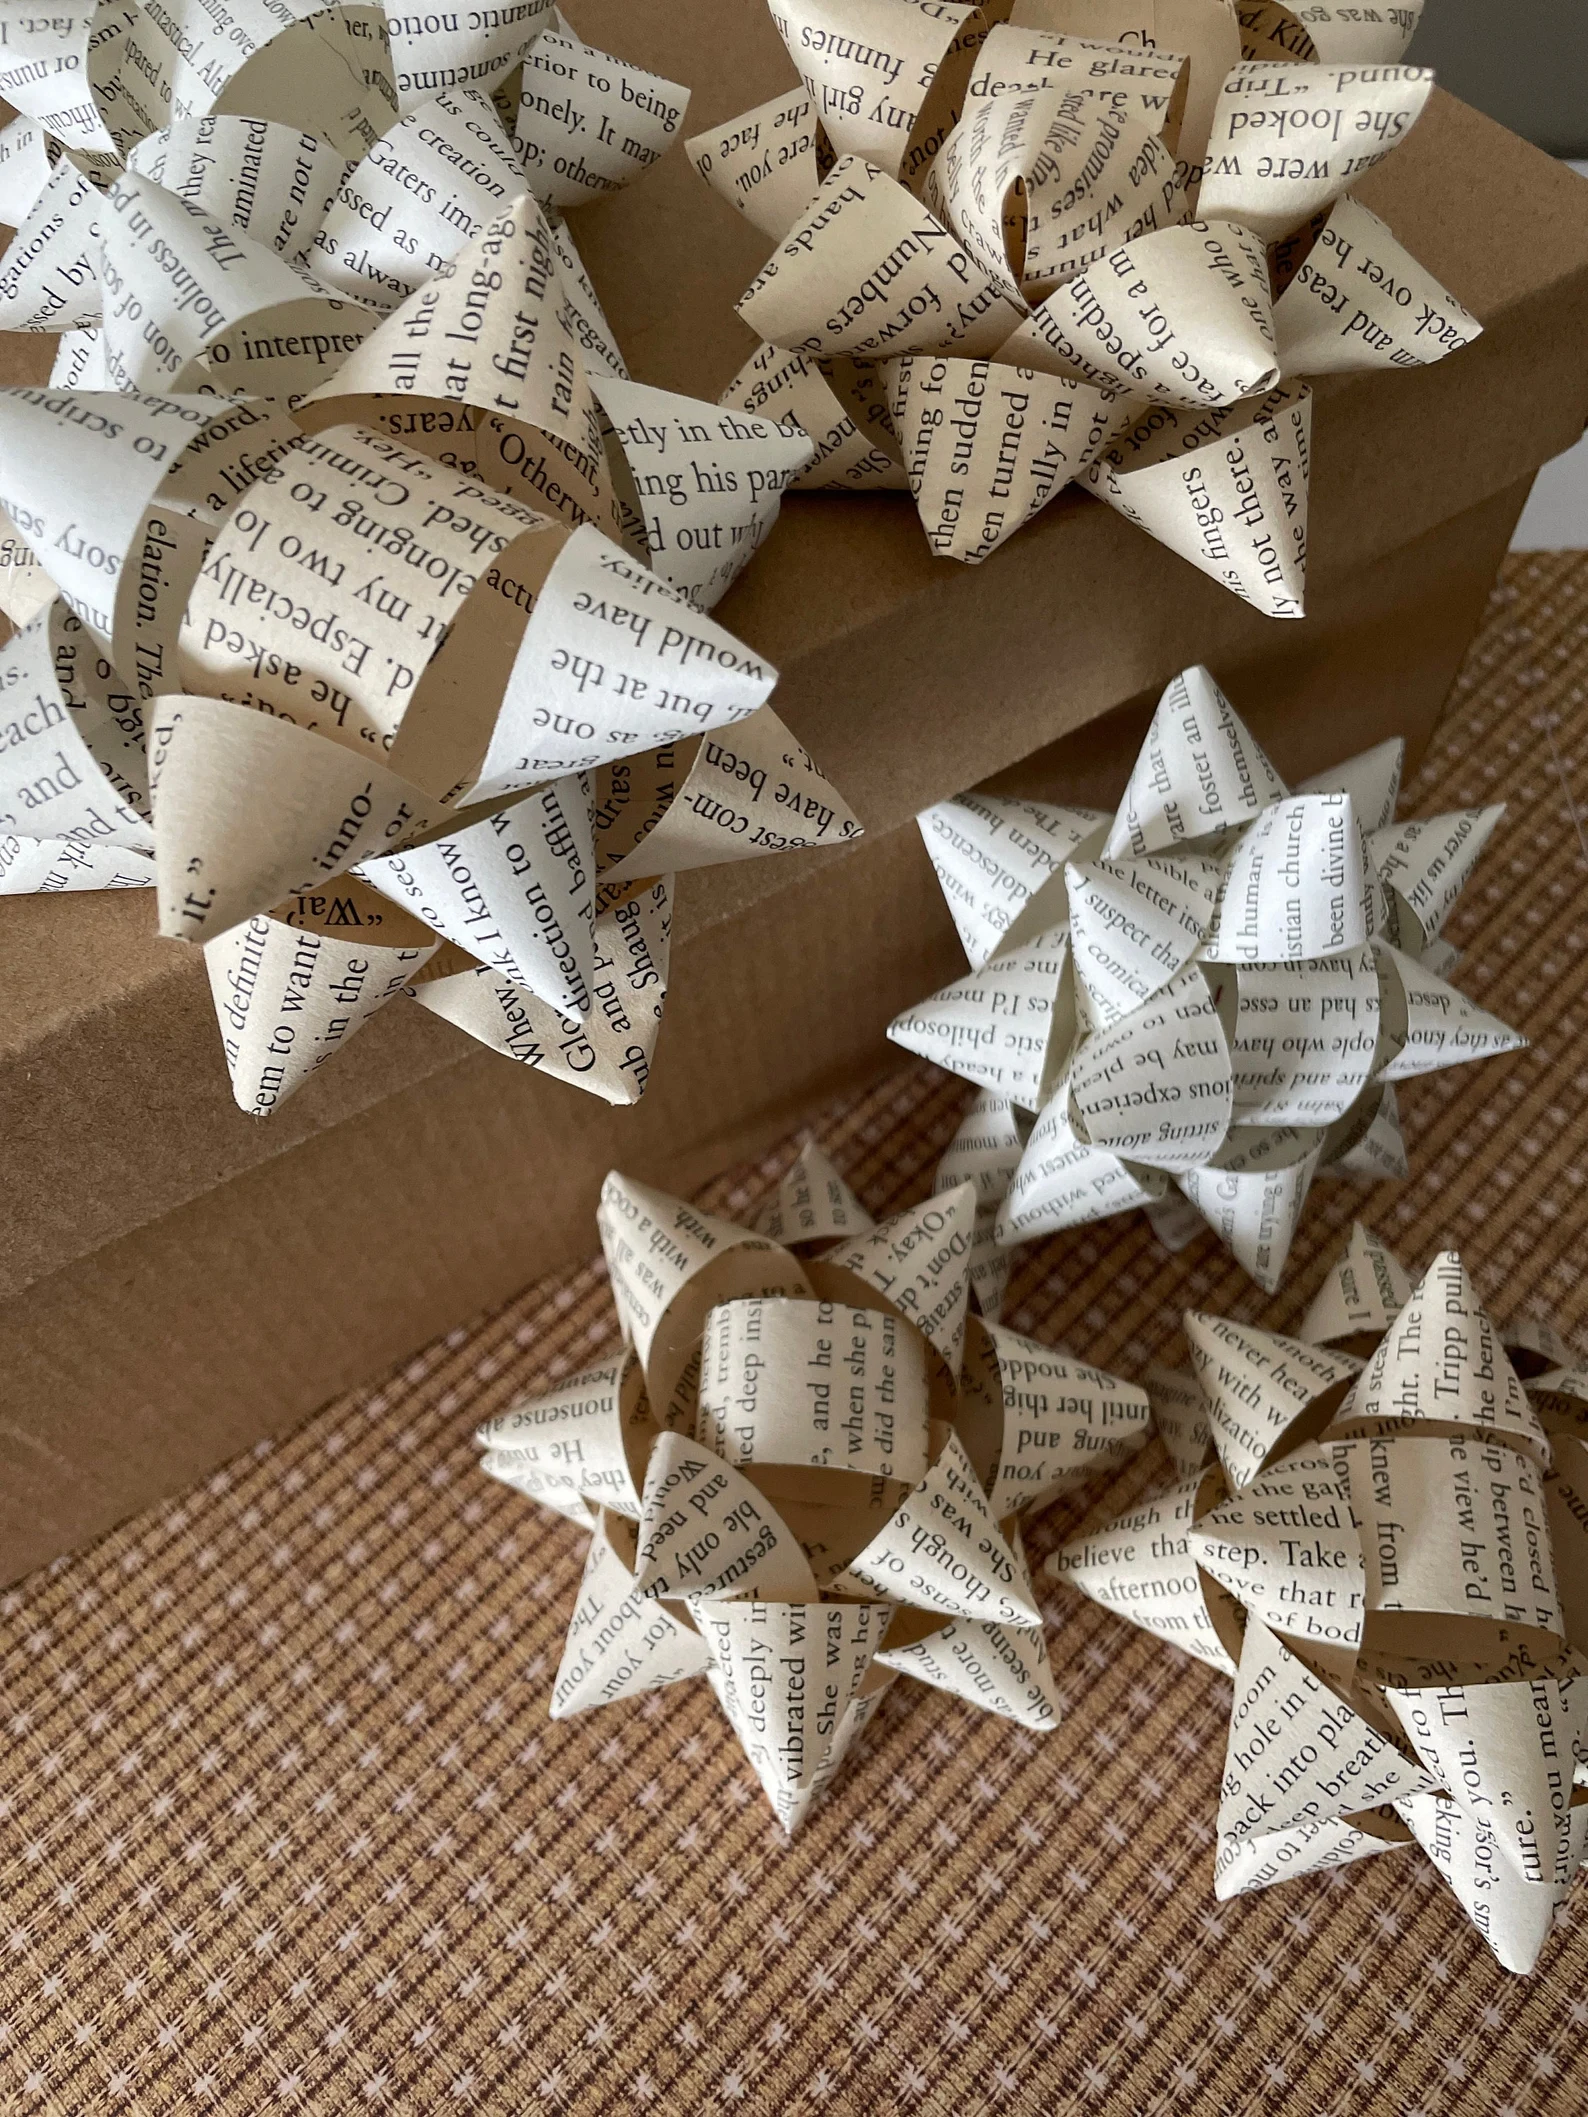 a pile of gift bows made out of old book pages